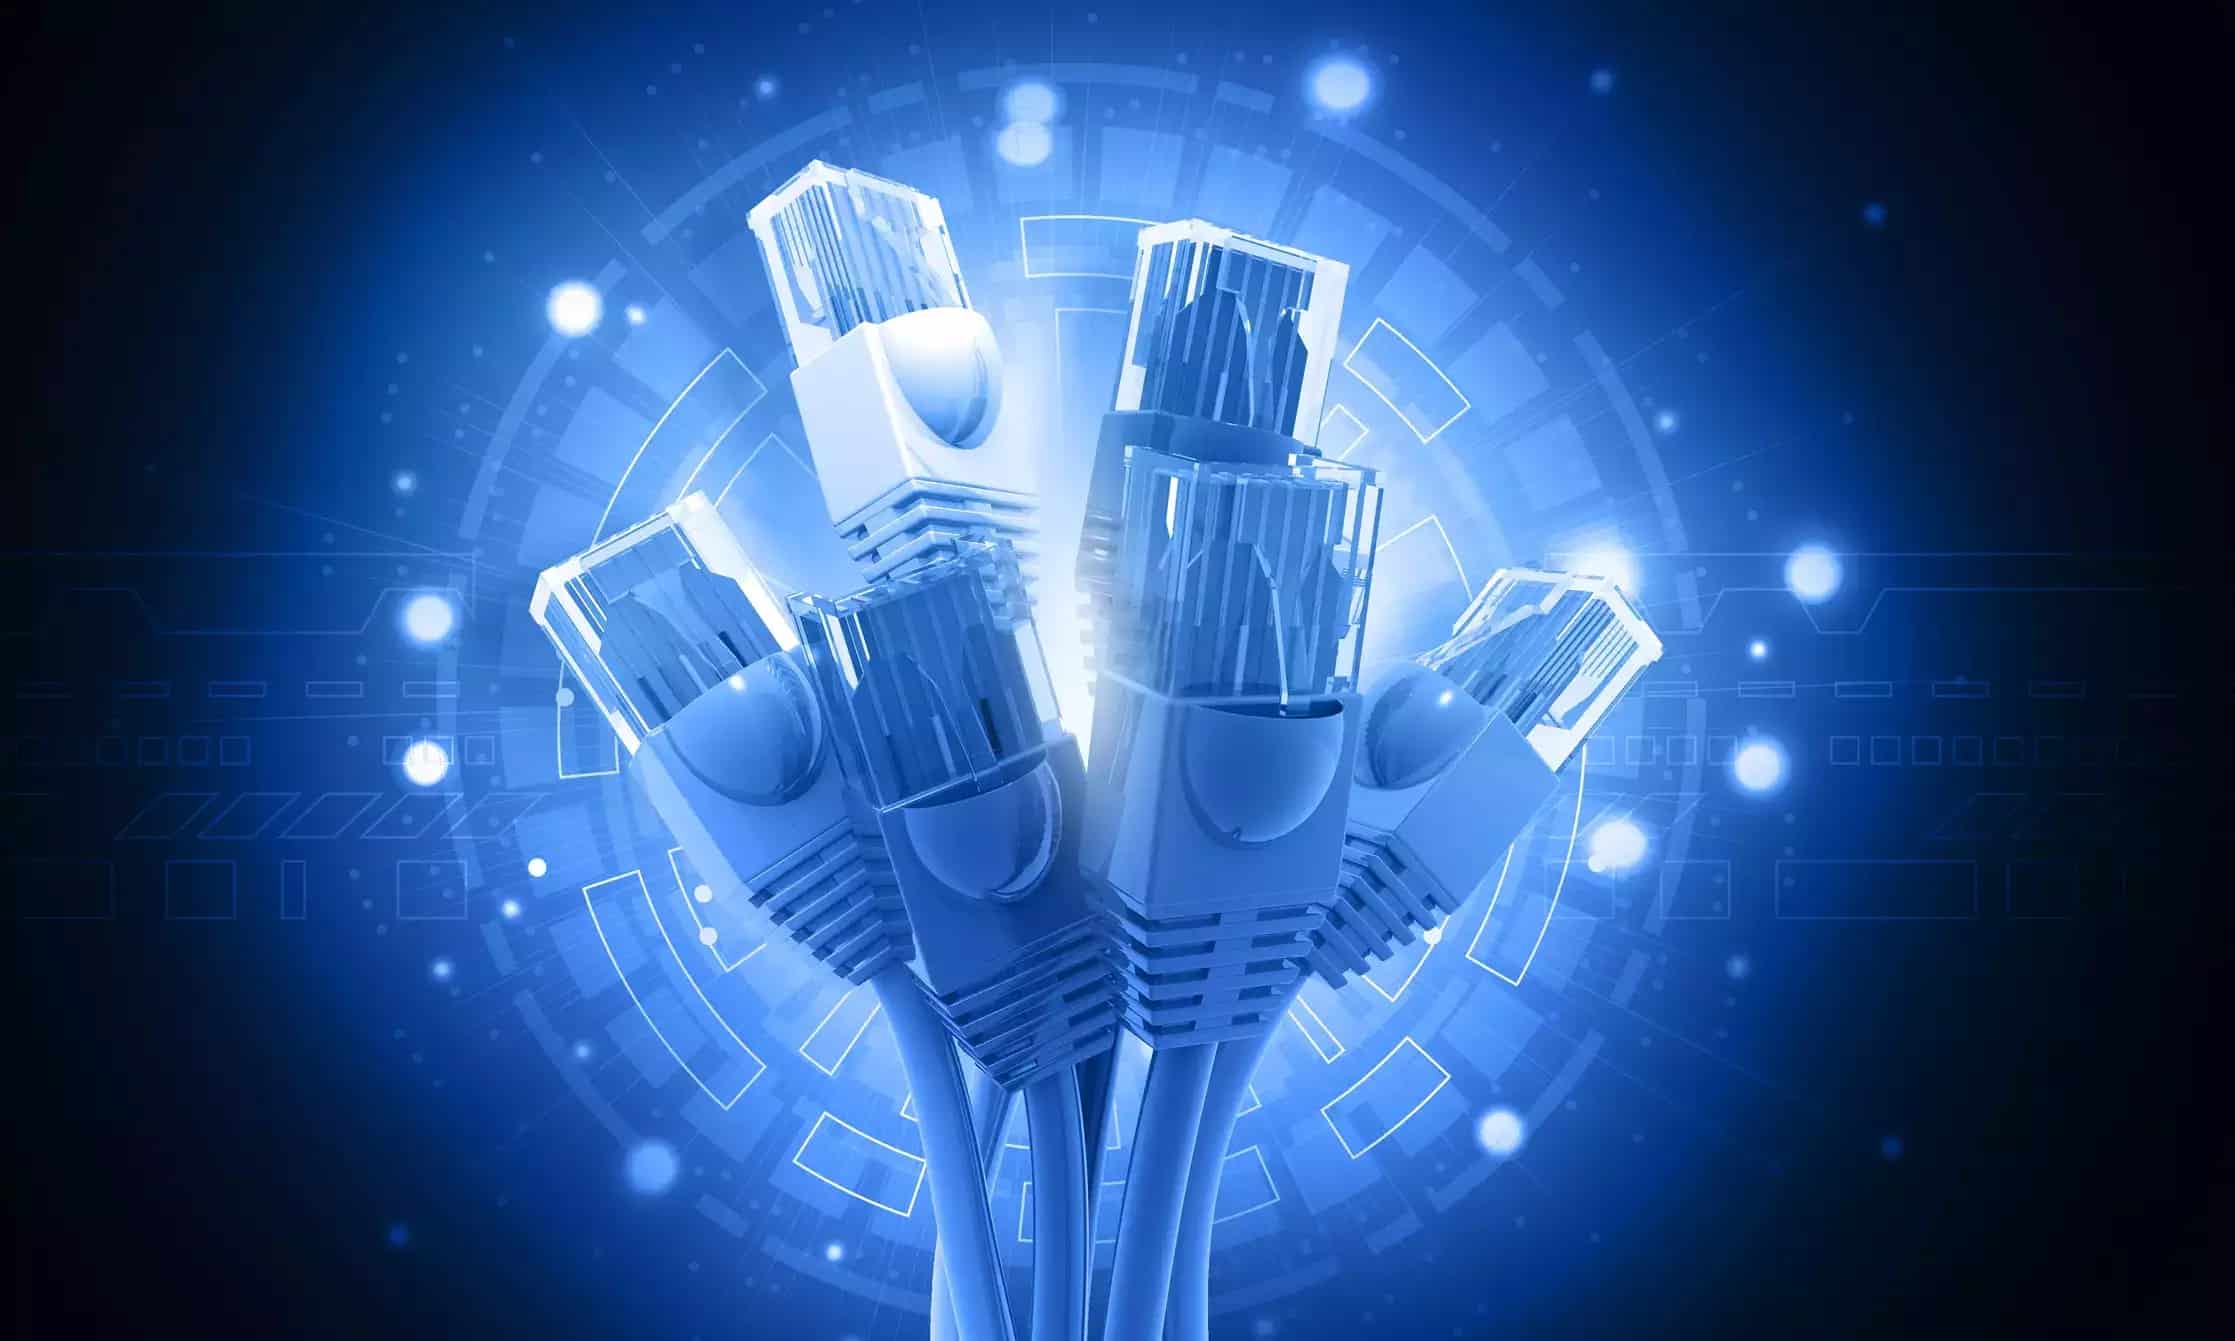 97.5 percent of broadband connections in India meet TRAI's 2Mbps speed threshold: Ookla - TechnoSports